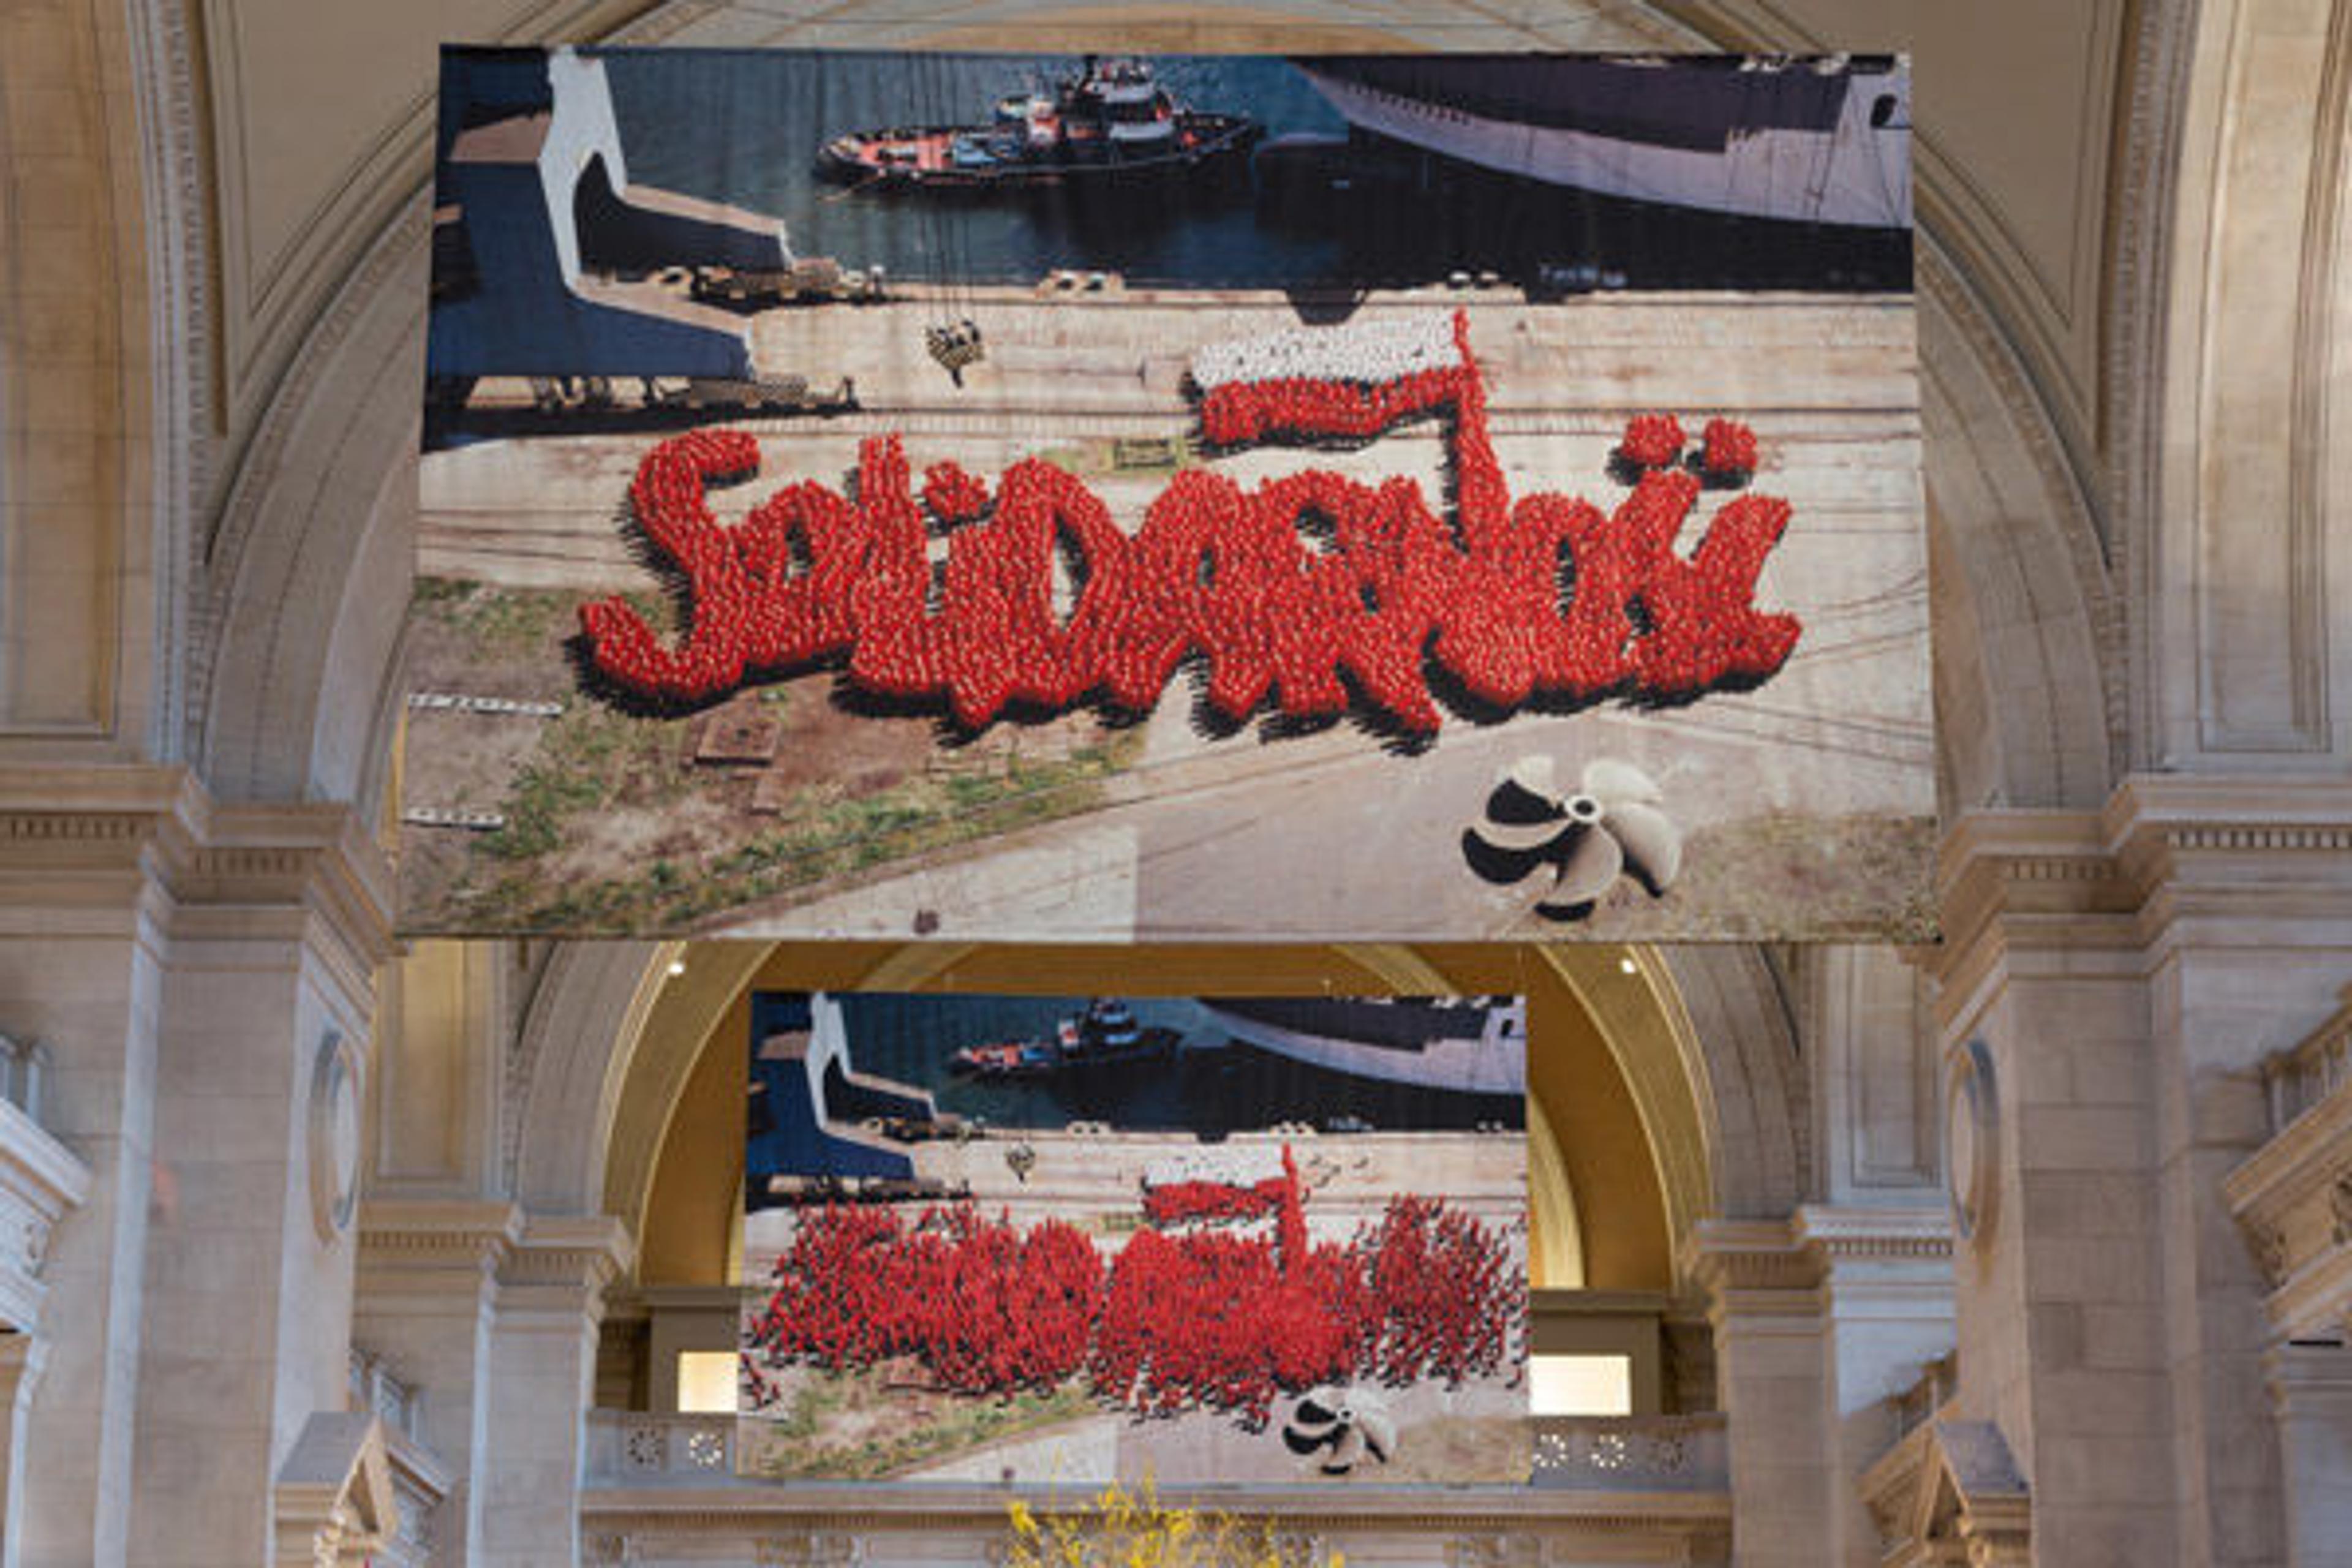 Piotr Uklański's Solidarity in the Great Hall. Photograph by Wilson Santiago